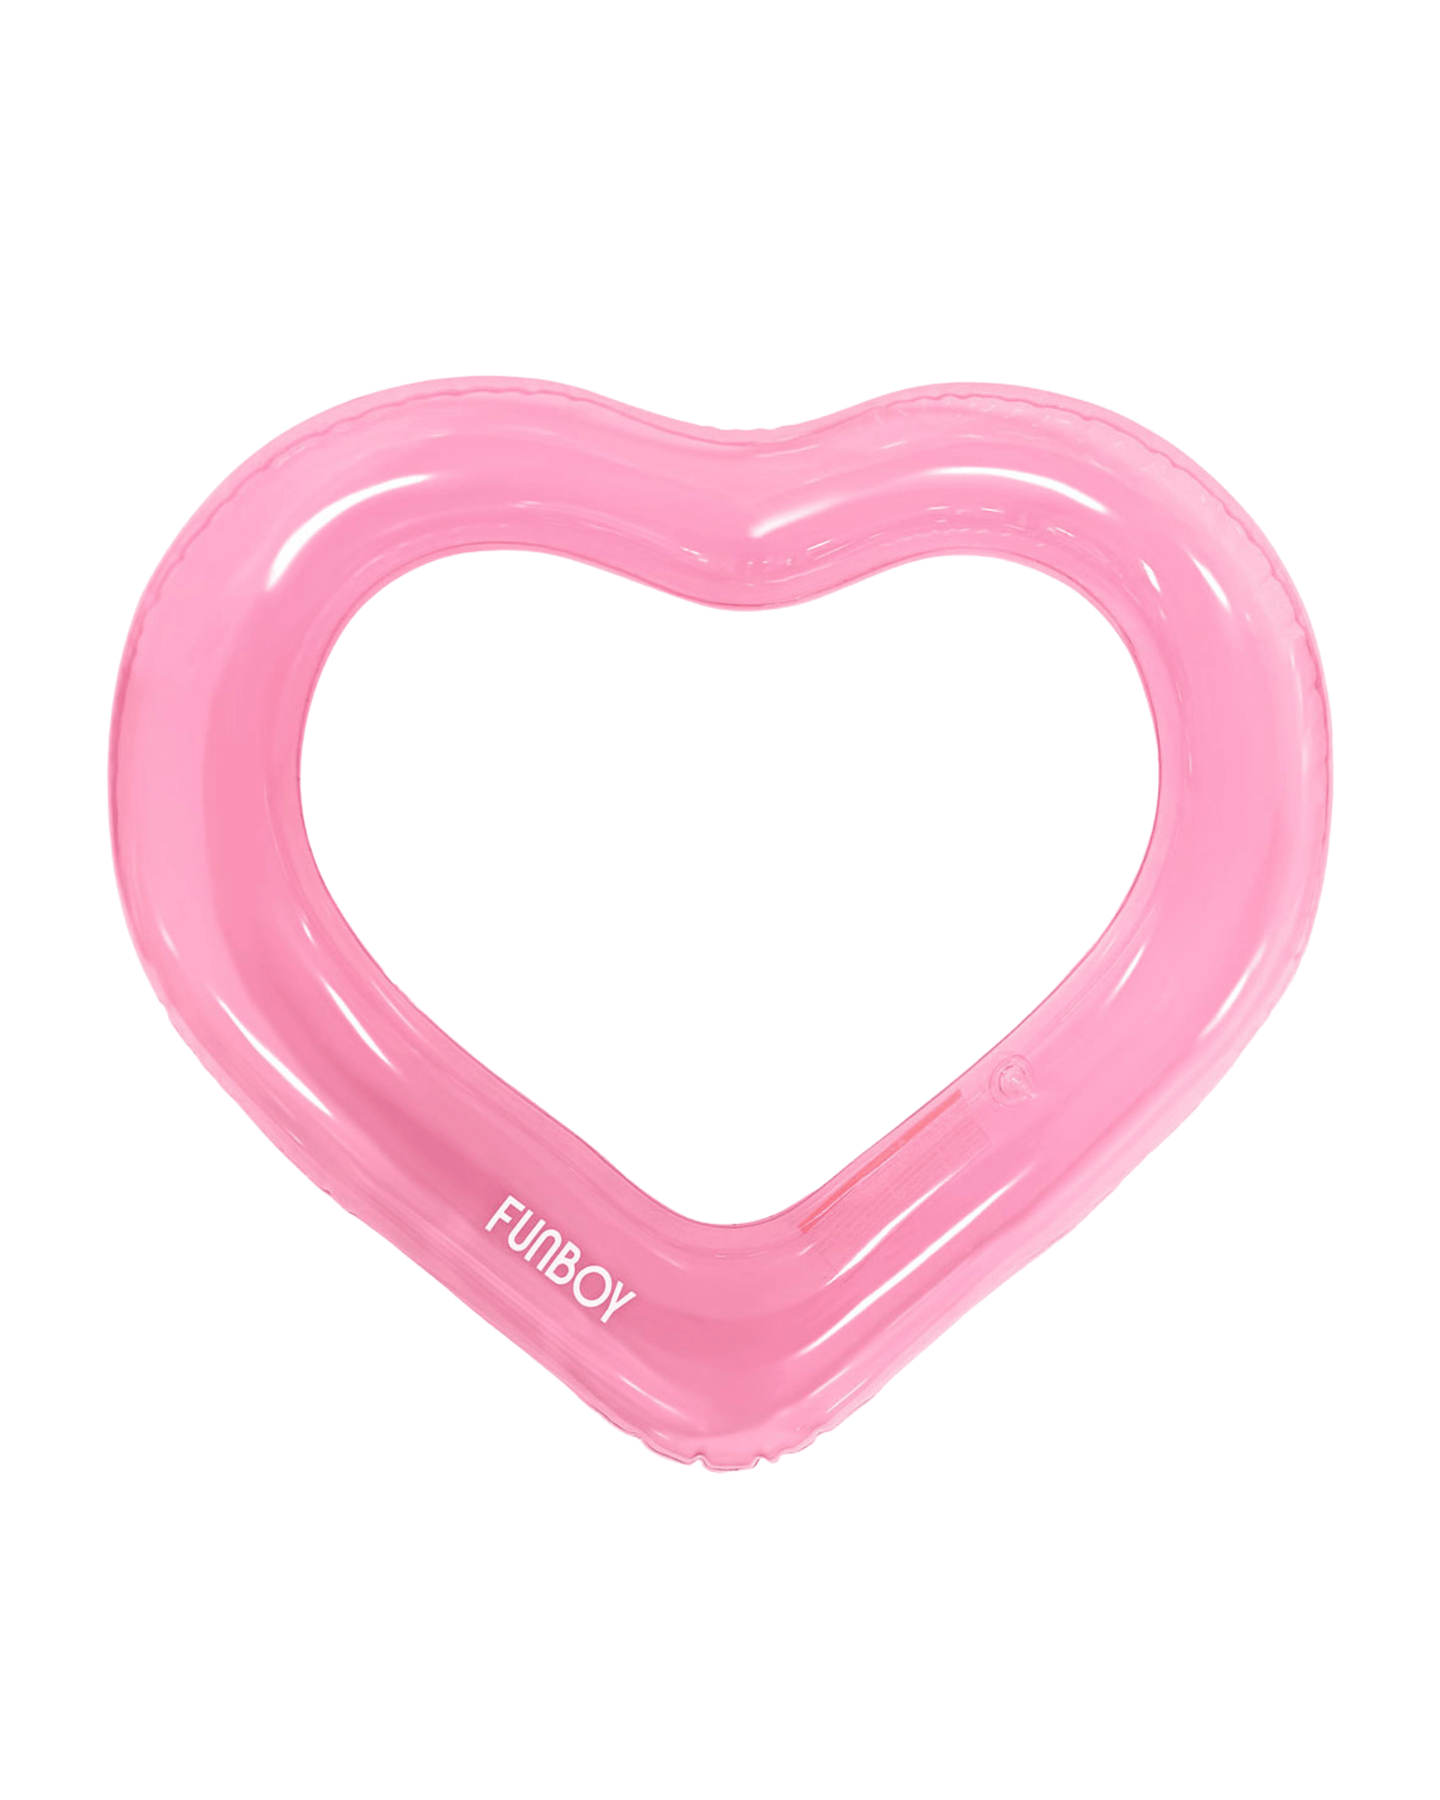 Funboy clear pink tube float